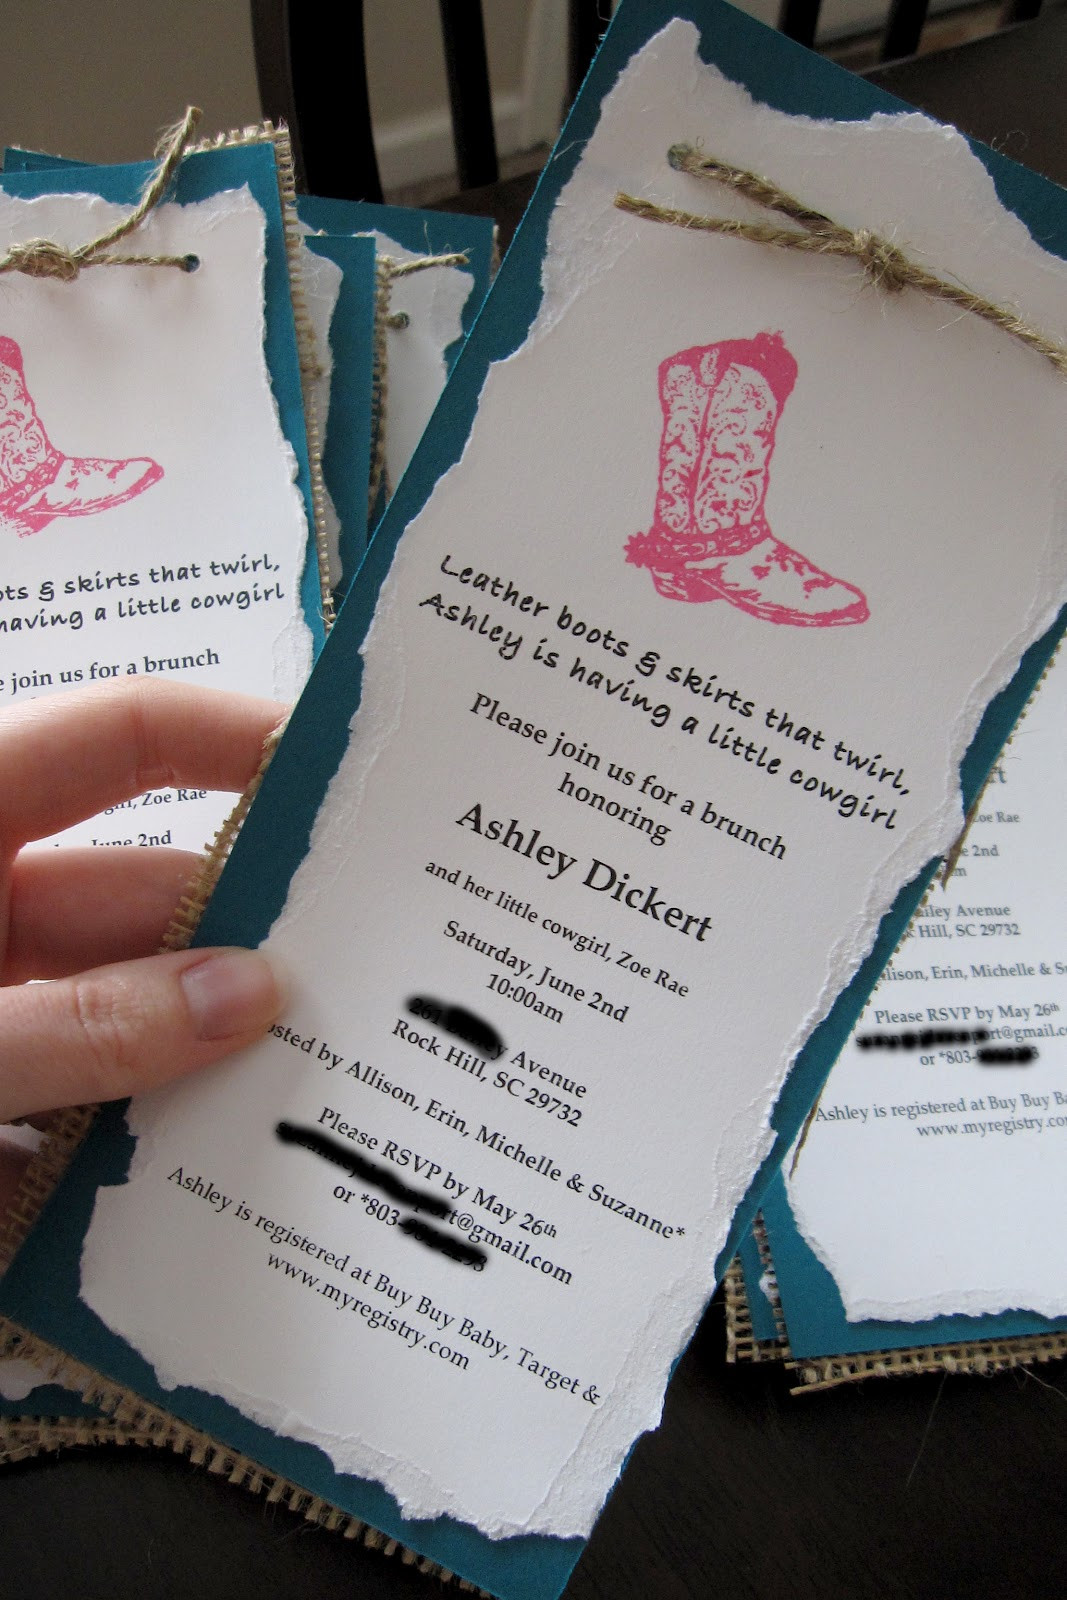 Baby Shower Invitations DIY
 A Southern Hostess DIY Cowgirl Baby Shower Invitations